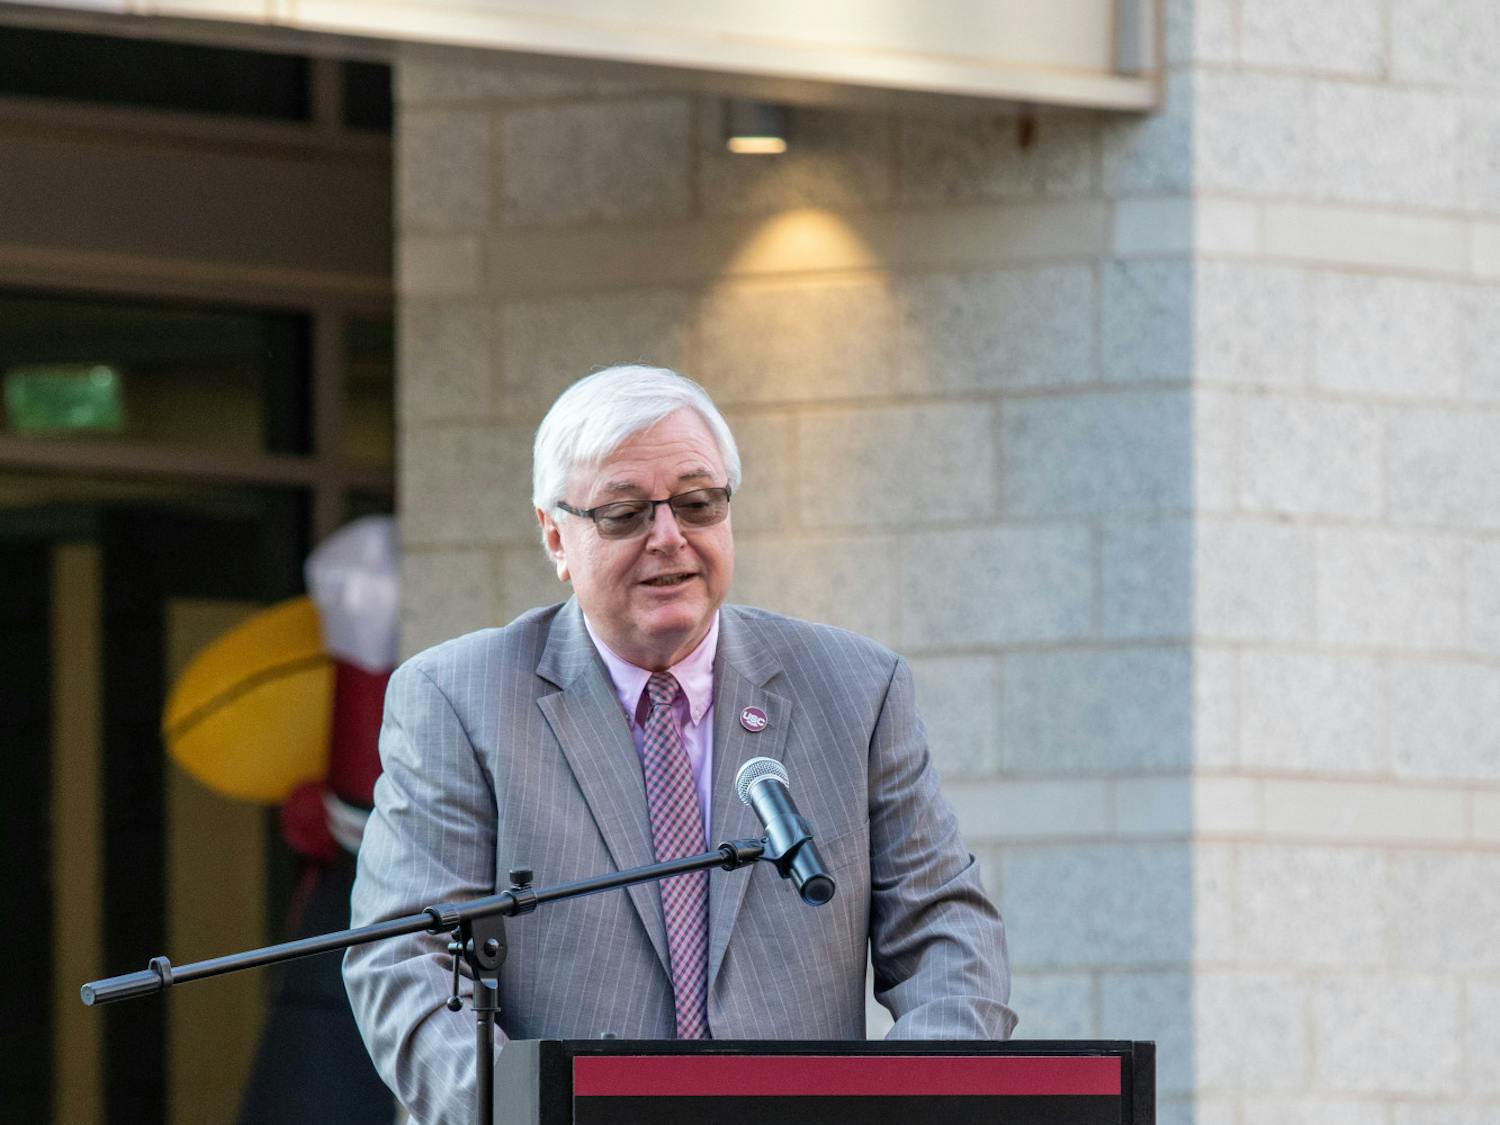 USC President Michael Amiridis speaks at the ribbon-cutting ceremony in Campus Village. Amiridis said the addition of residence halls represents the future potential of the university.&nbsp;